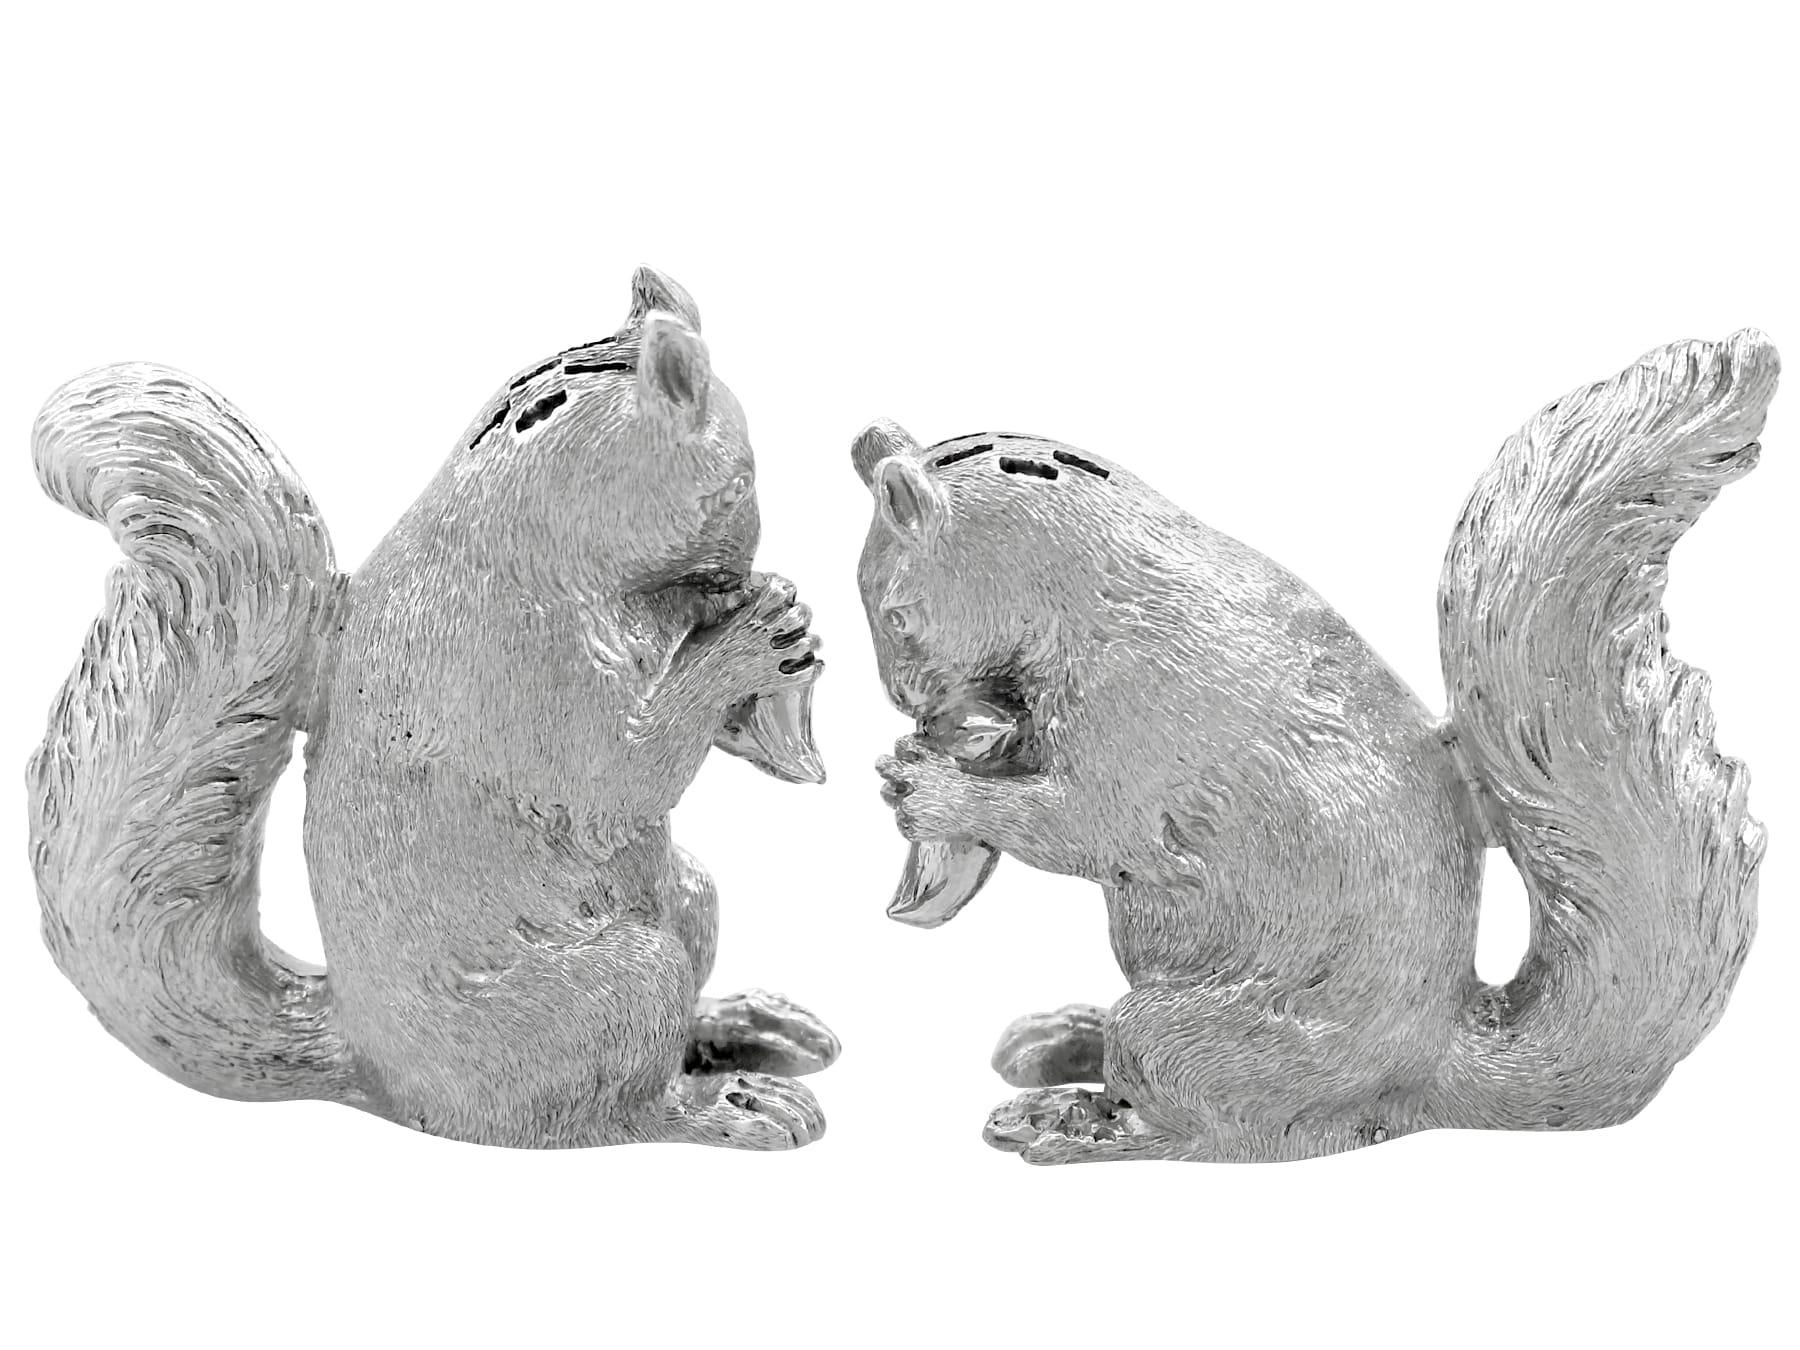 An exceptional, fine and impressive, rare pair of antique Victorian English cast sterling silver peppers in the form of squirrels; an addition to our silver cruets / condiments collection

These exceptional and rare antique Victorian English cast